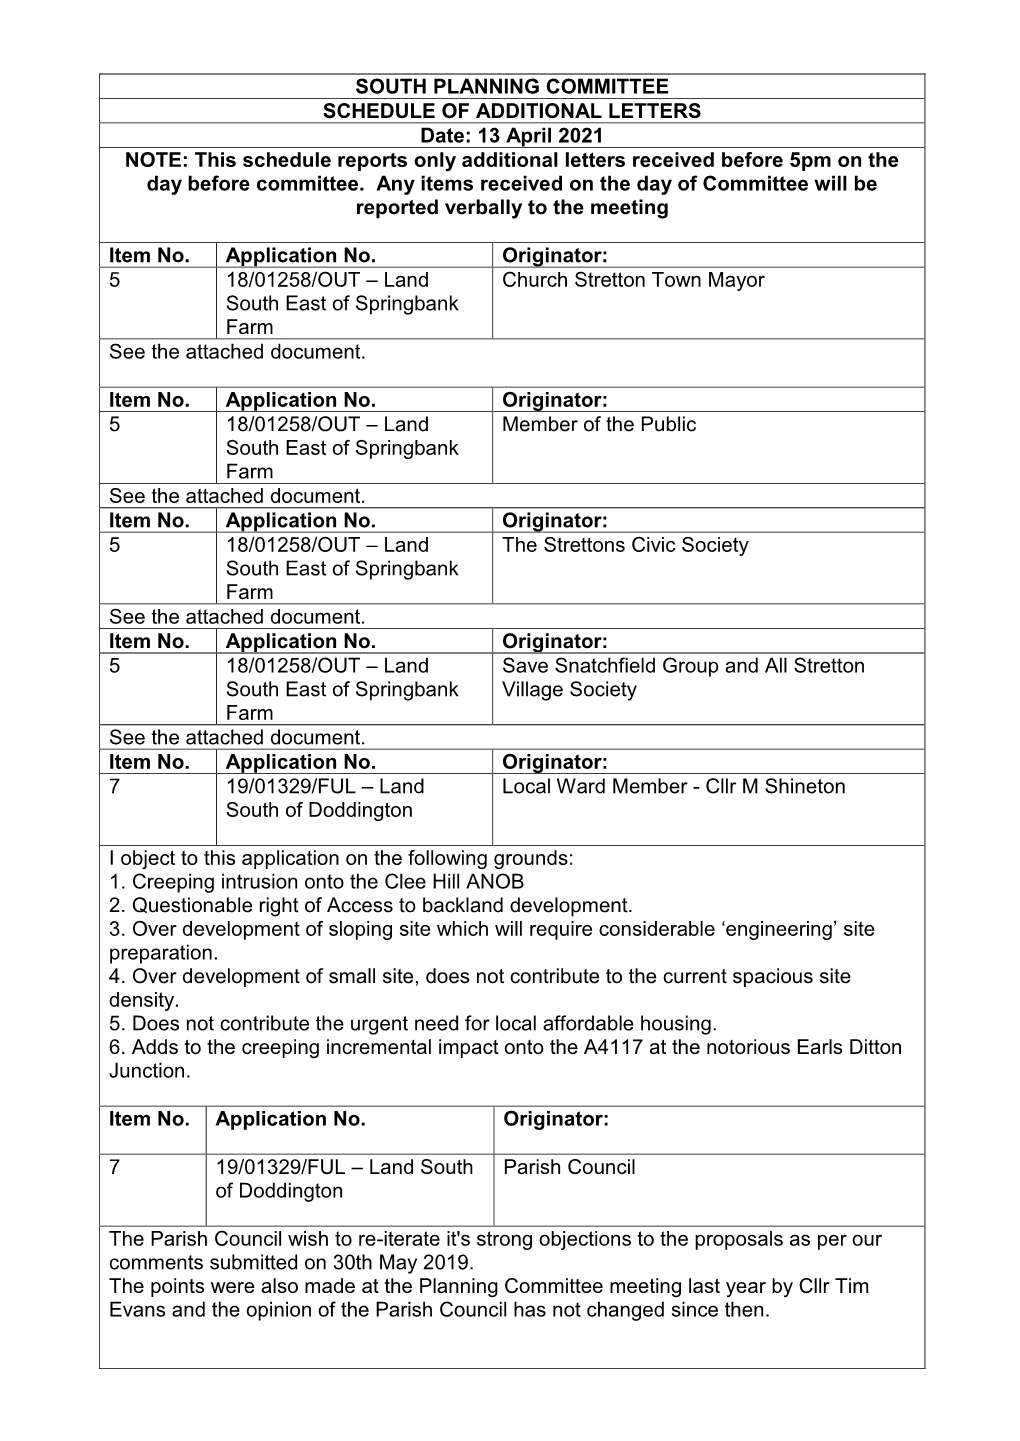 South Planning Committee Schedule